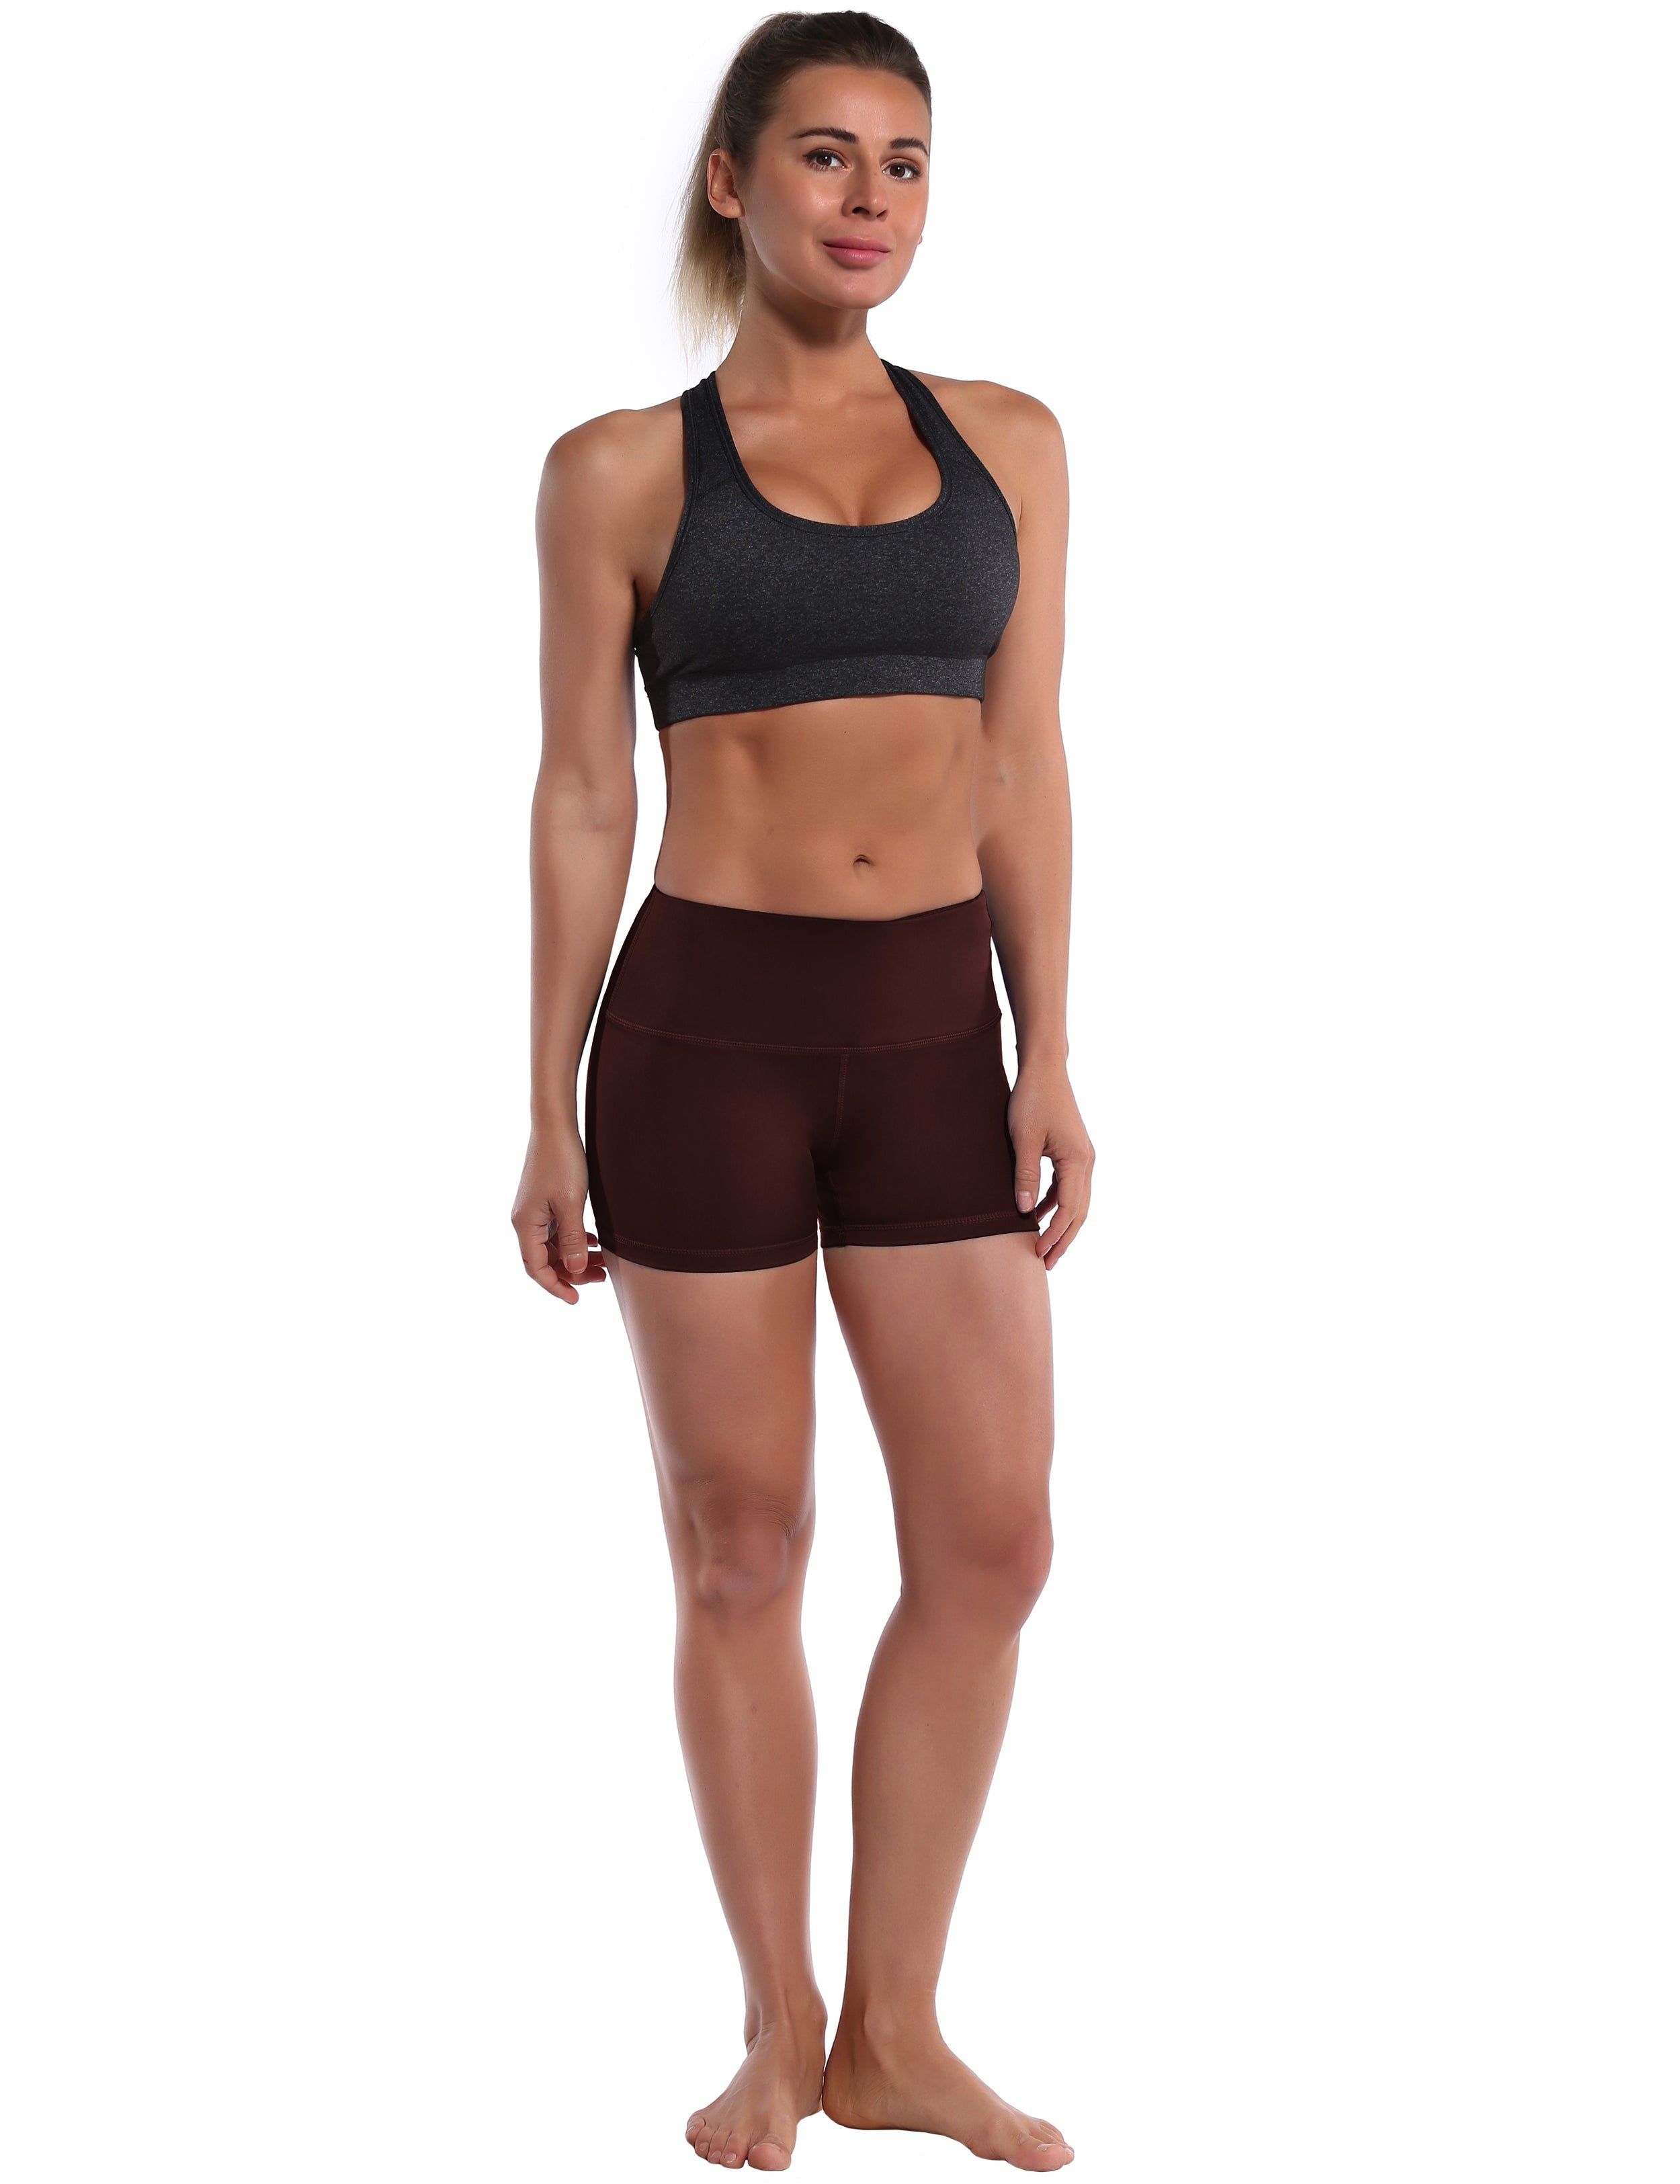 2.5" Golf Shorts mahoganymaroon Softest-ever fabric High elasticity High density 4-way stretch Fabric doesn't attract lint easily No see-through Moisture-wicking Machine wash 75% Nylon, 25% Spandex